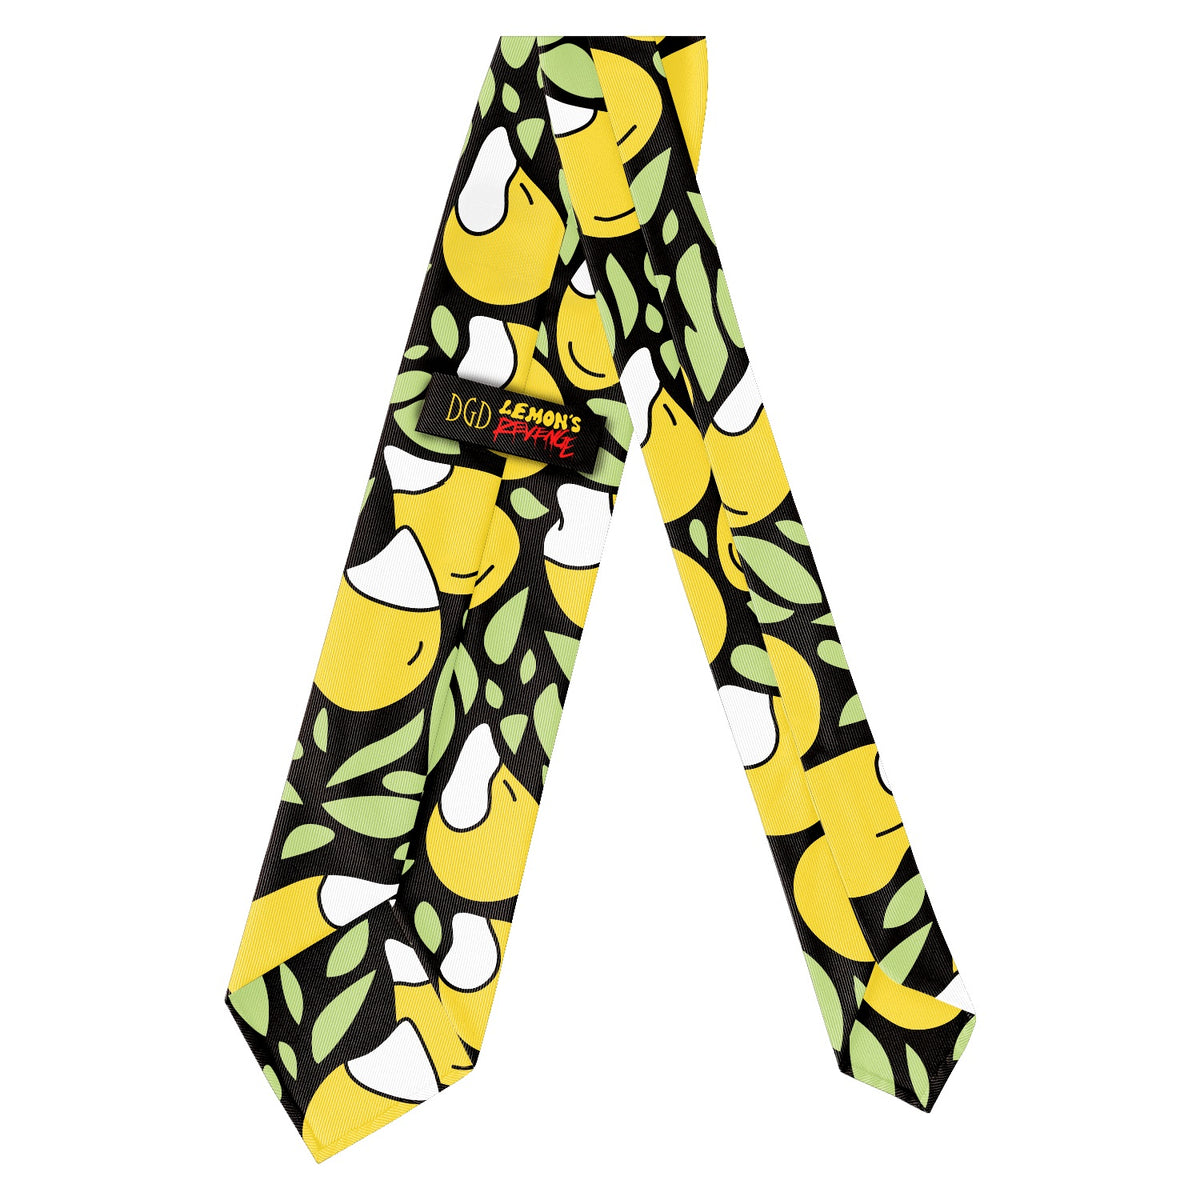 image of a tie on a white background. tie is custom printed and has lemons on it